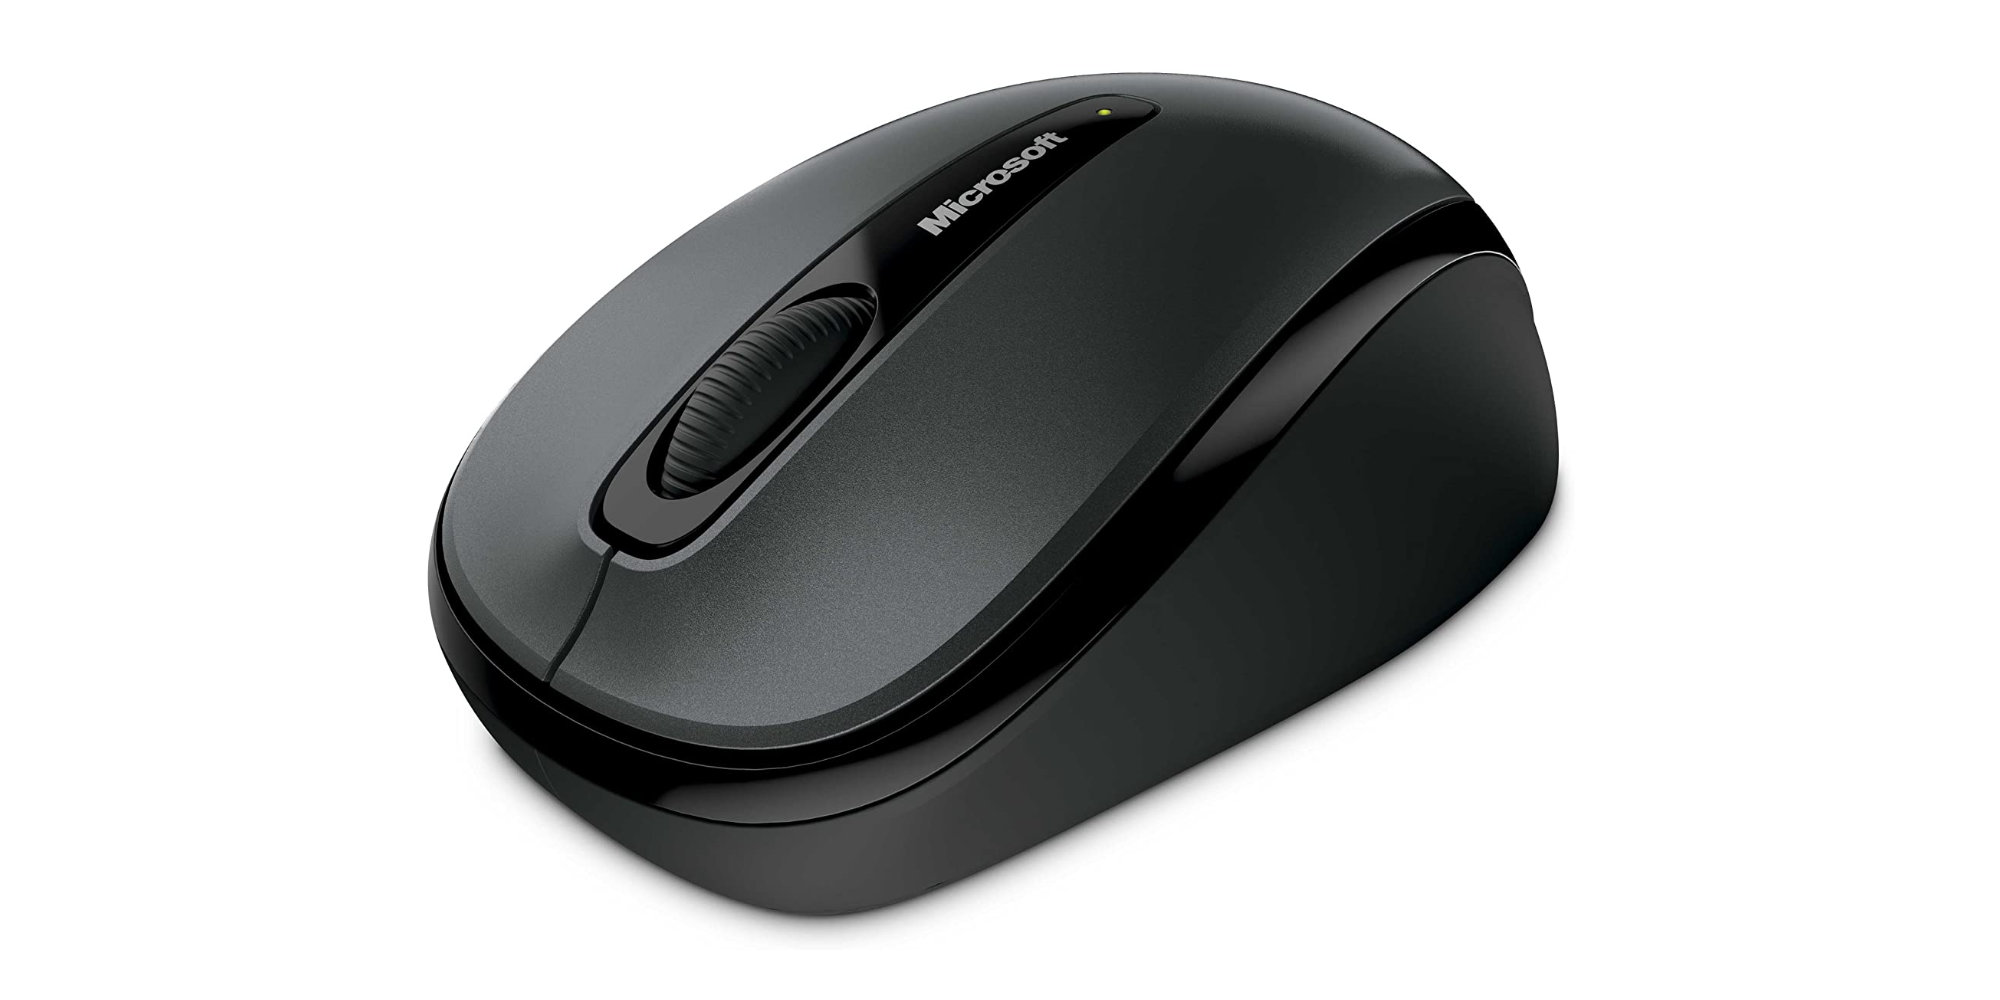 how to use microsoft wireless mouse 3500